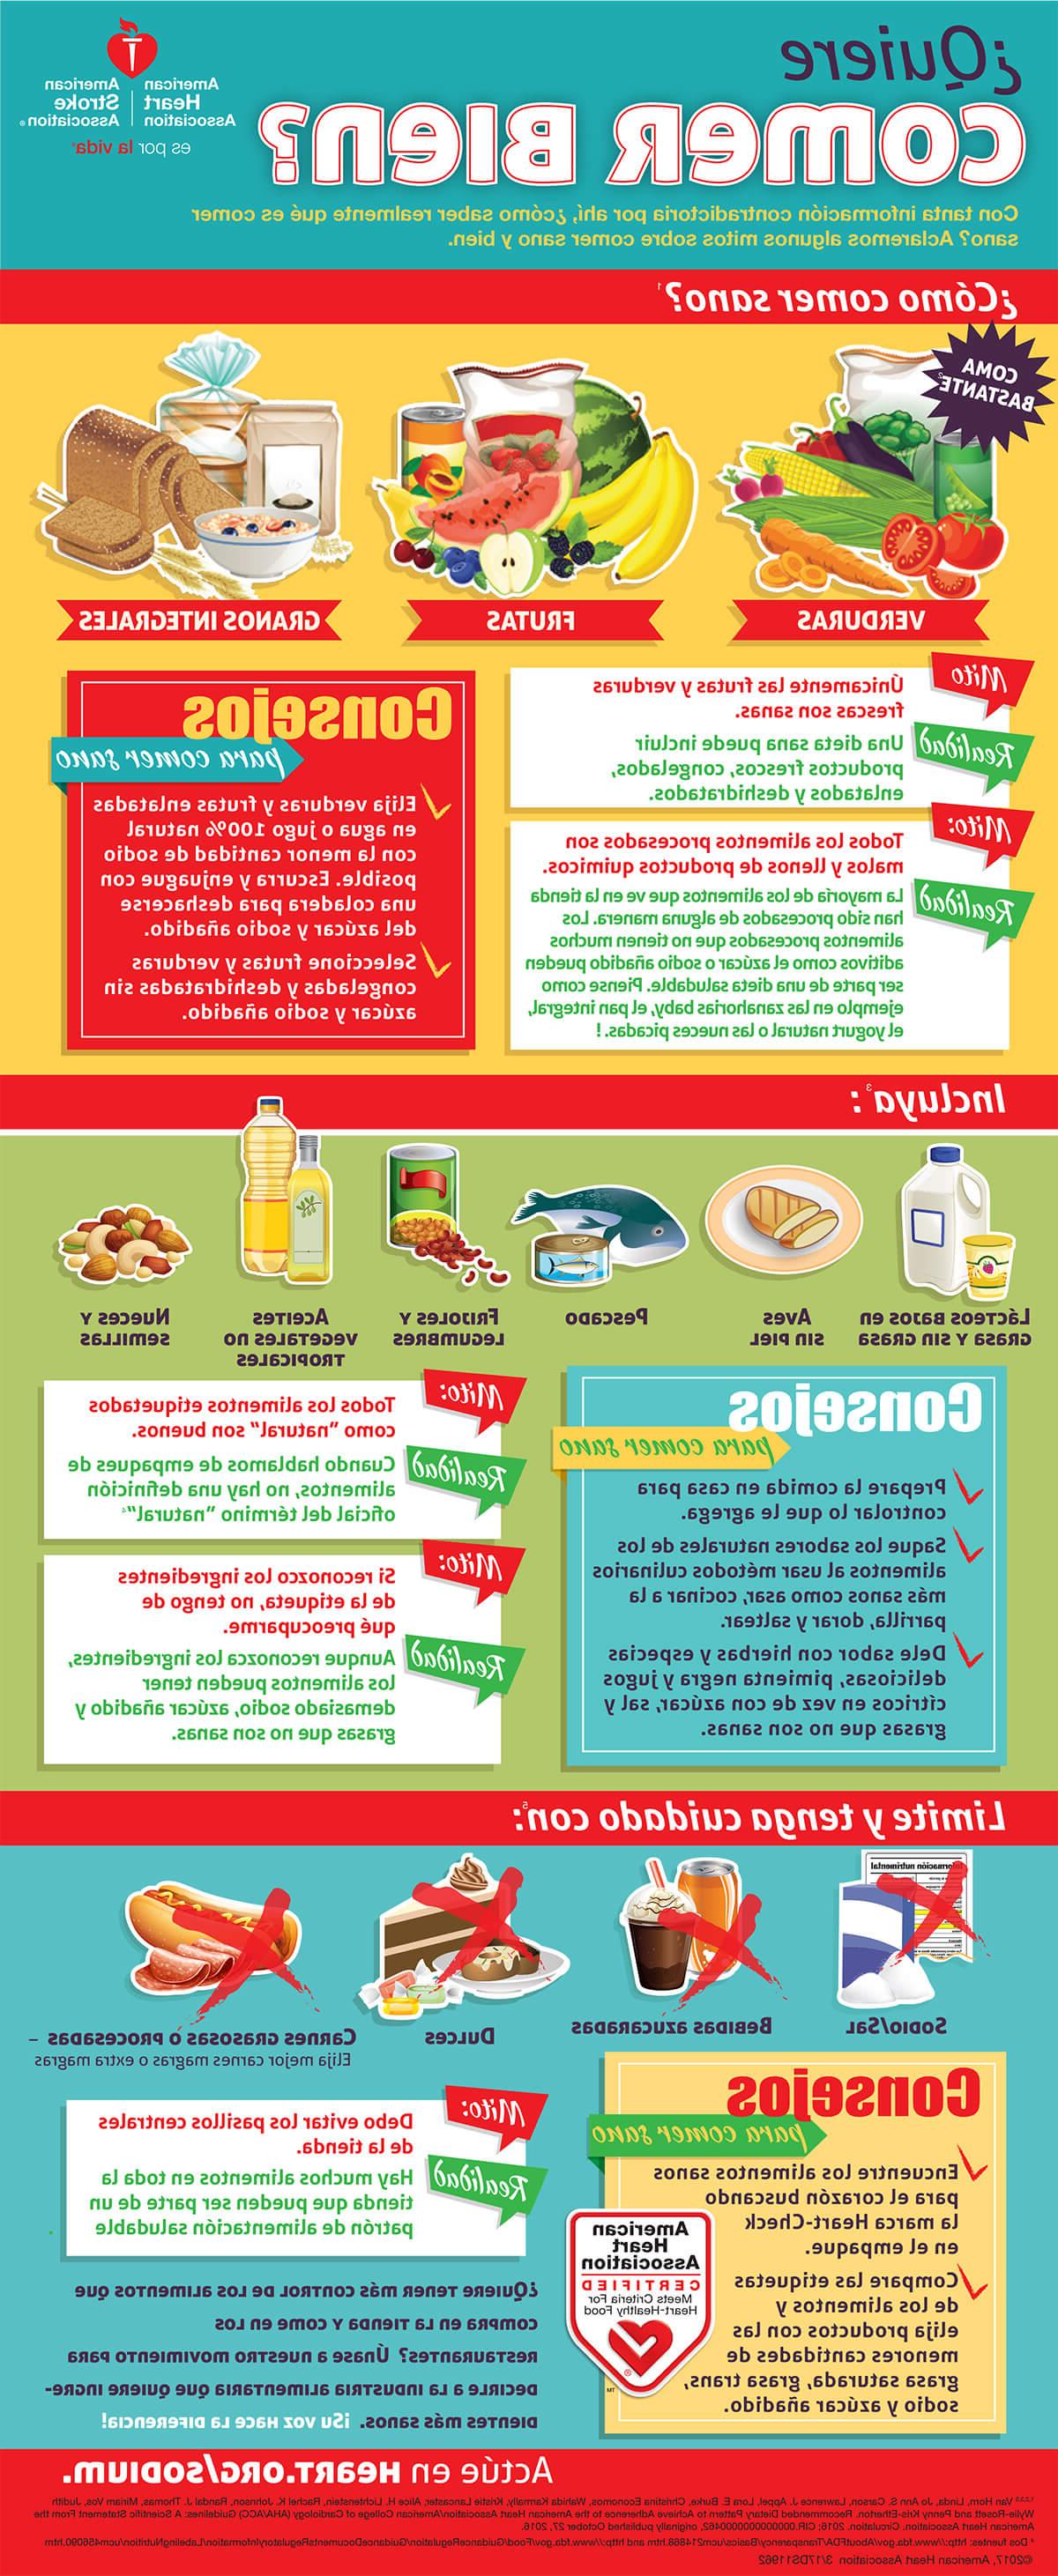 Spanish Clean Eating infographic